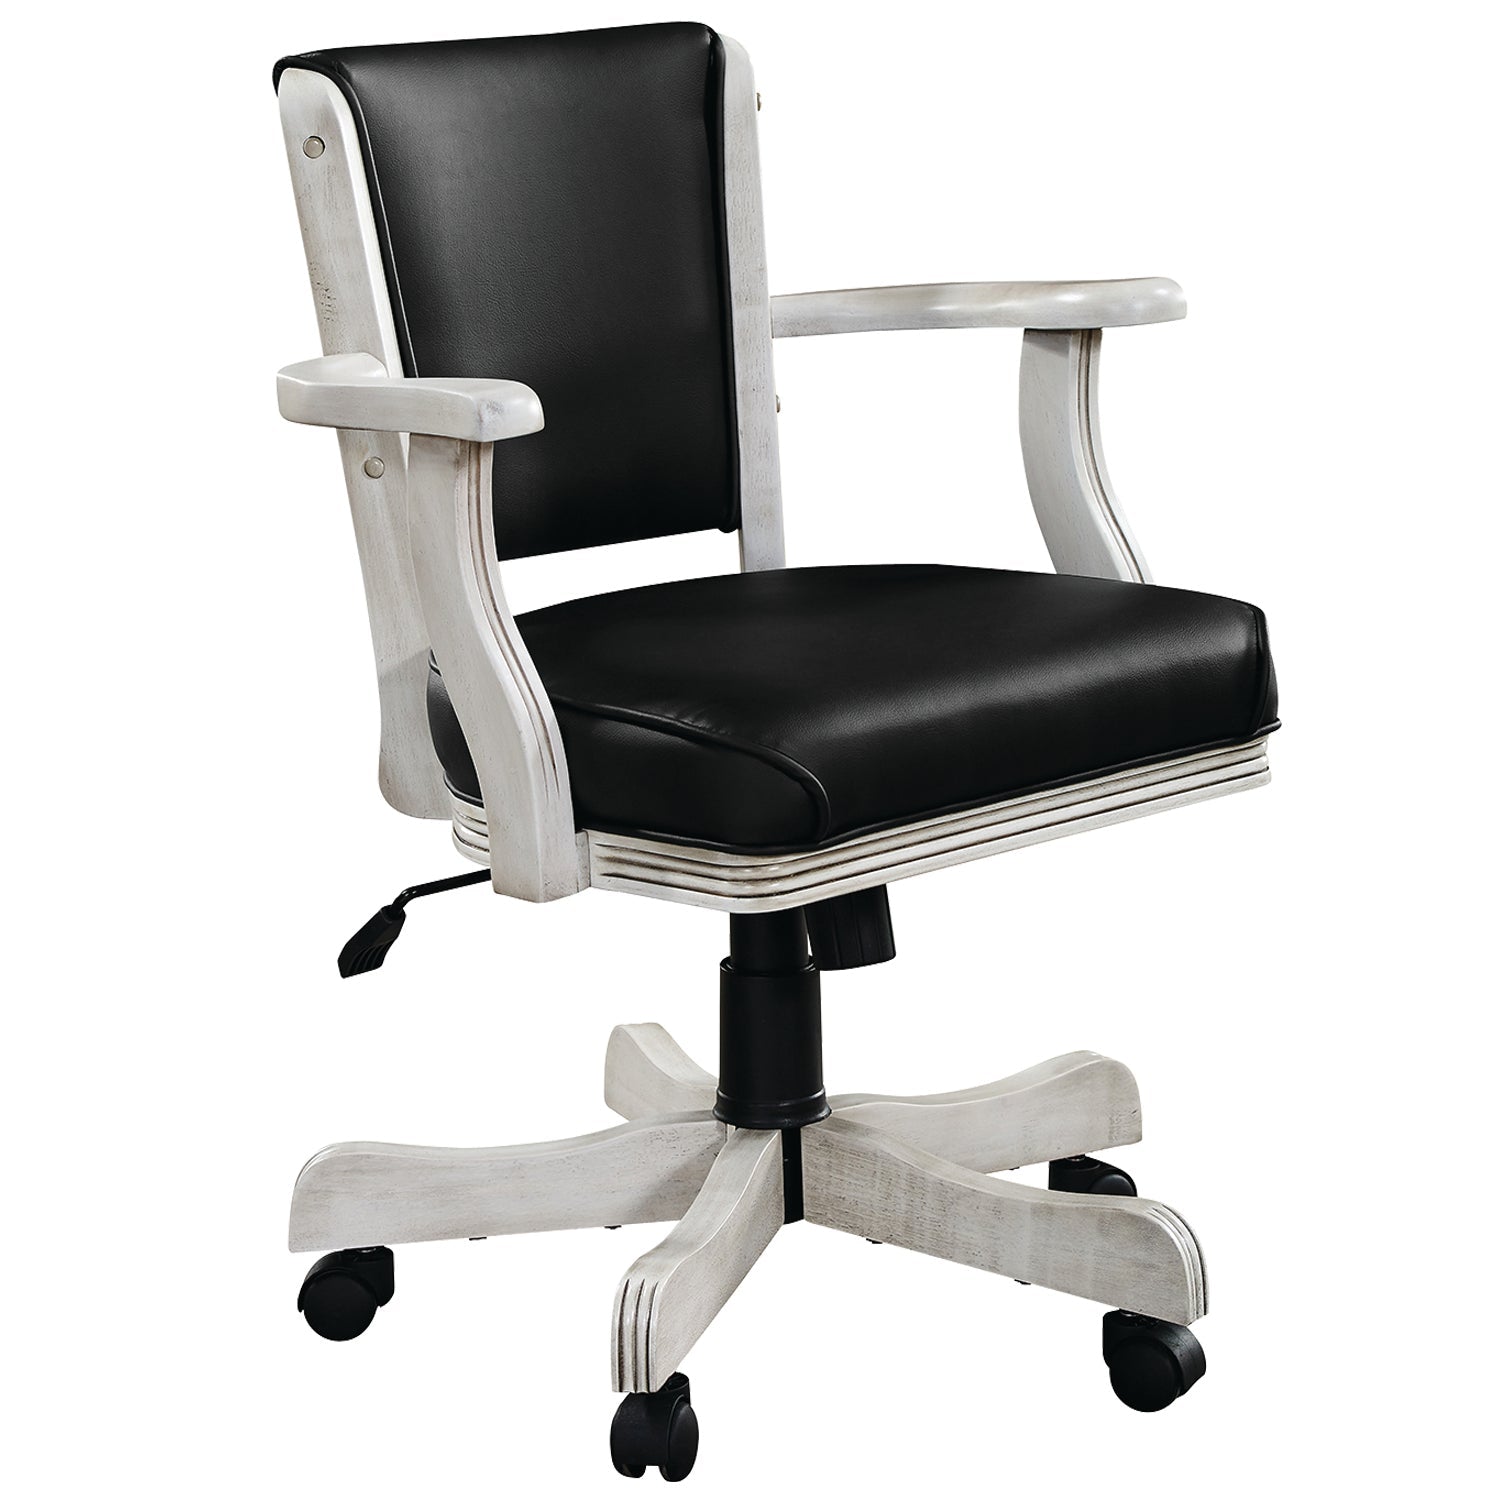 RAM GAME ROOM SWIVEL GAME CHAIR GCHR2-Game Table Genie